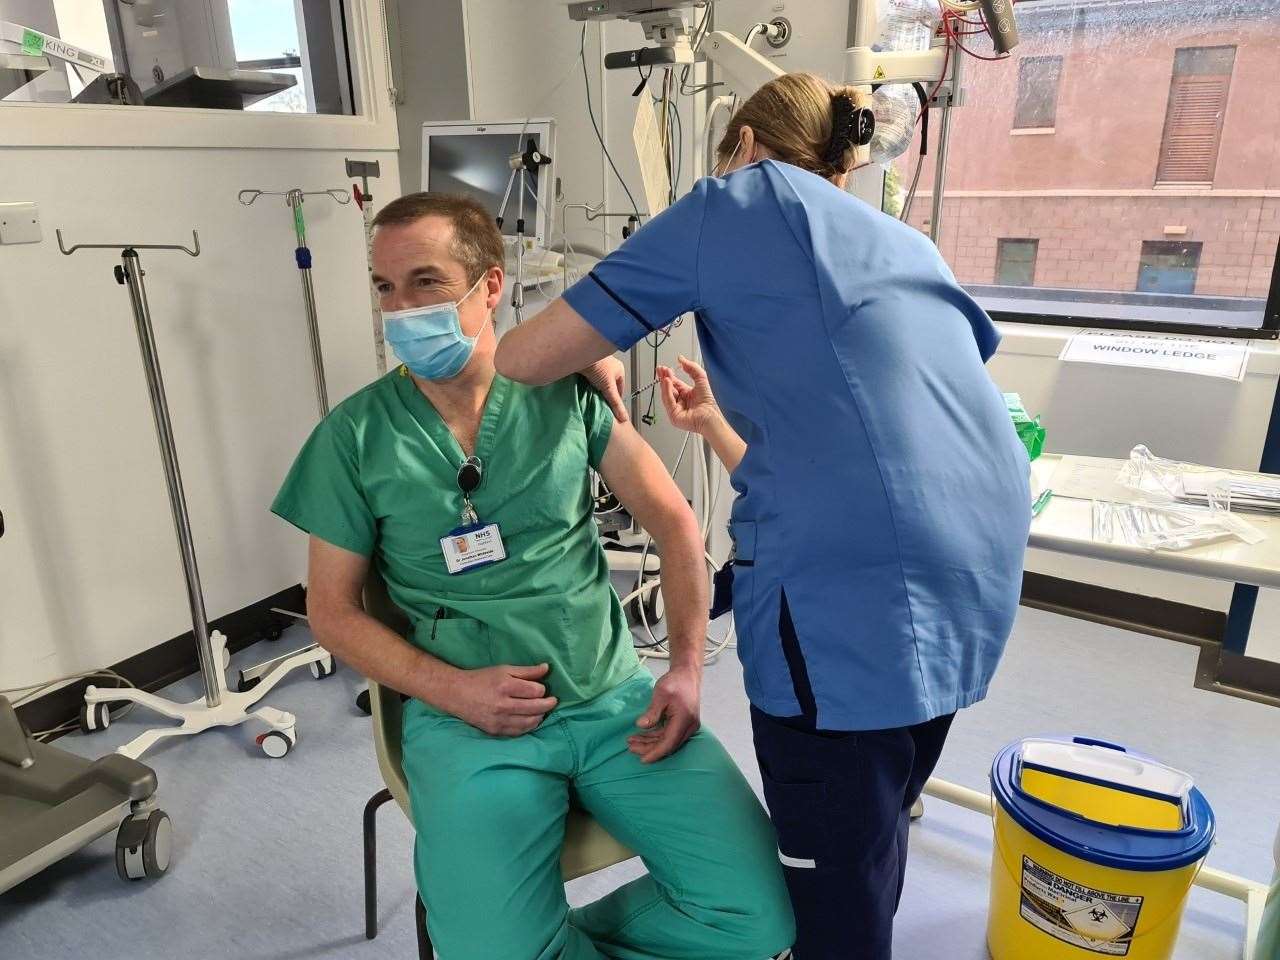 Dr Jonathan Whiteside, clinical lead for critical care with NHS Highland, is the first person to be vaccinated within the NHS Highland area. Maureen Sutherland is administering the vaccine.